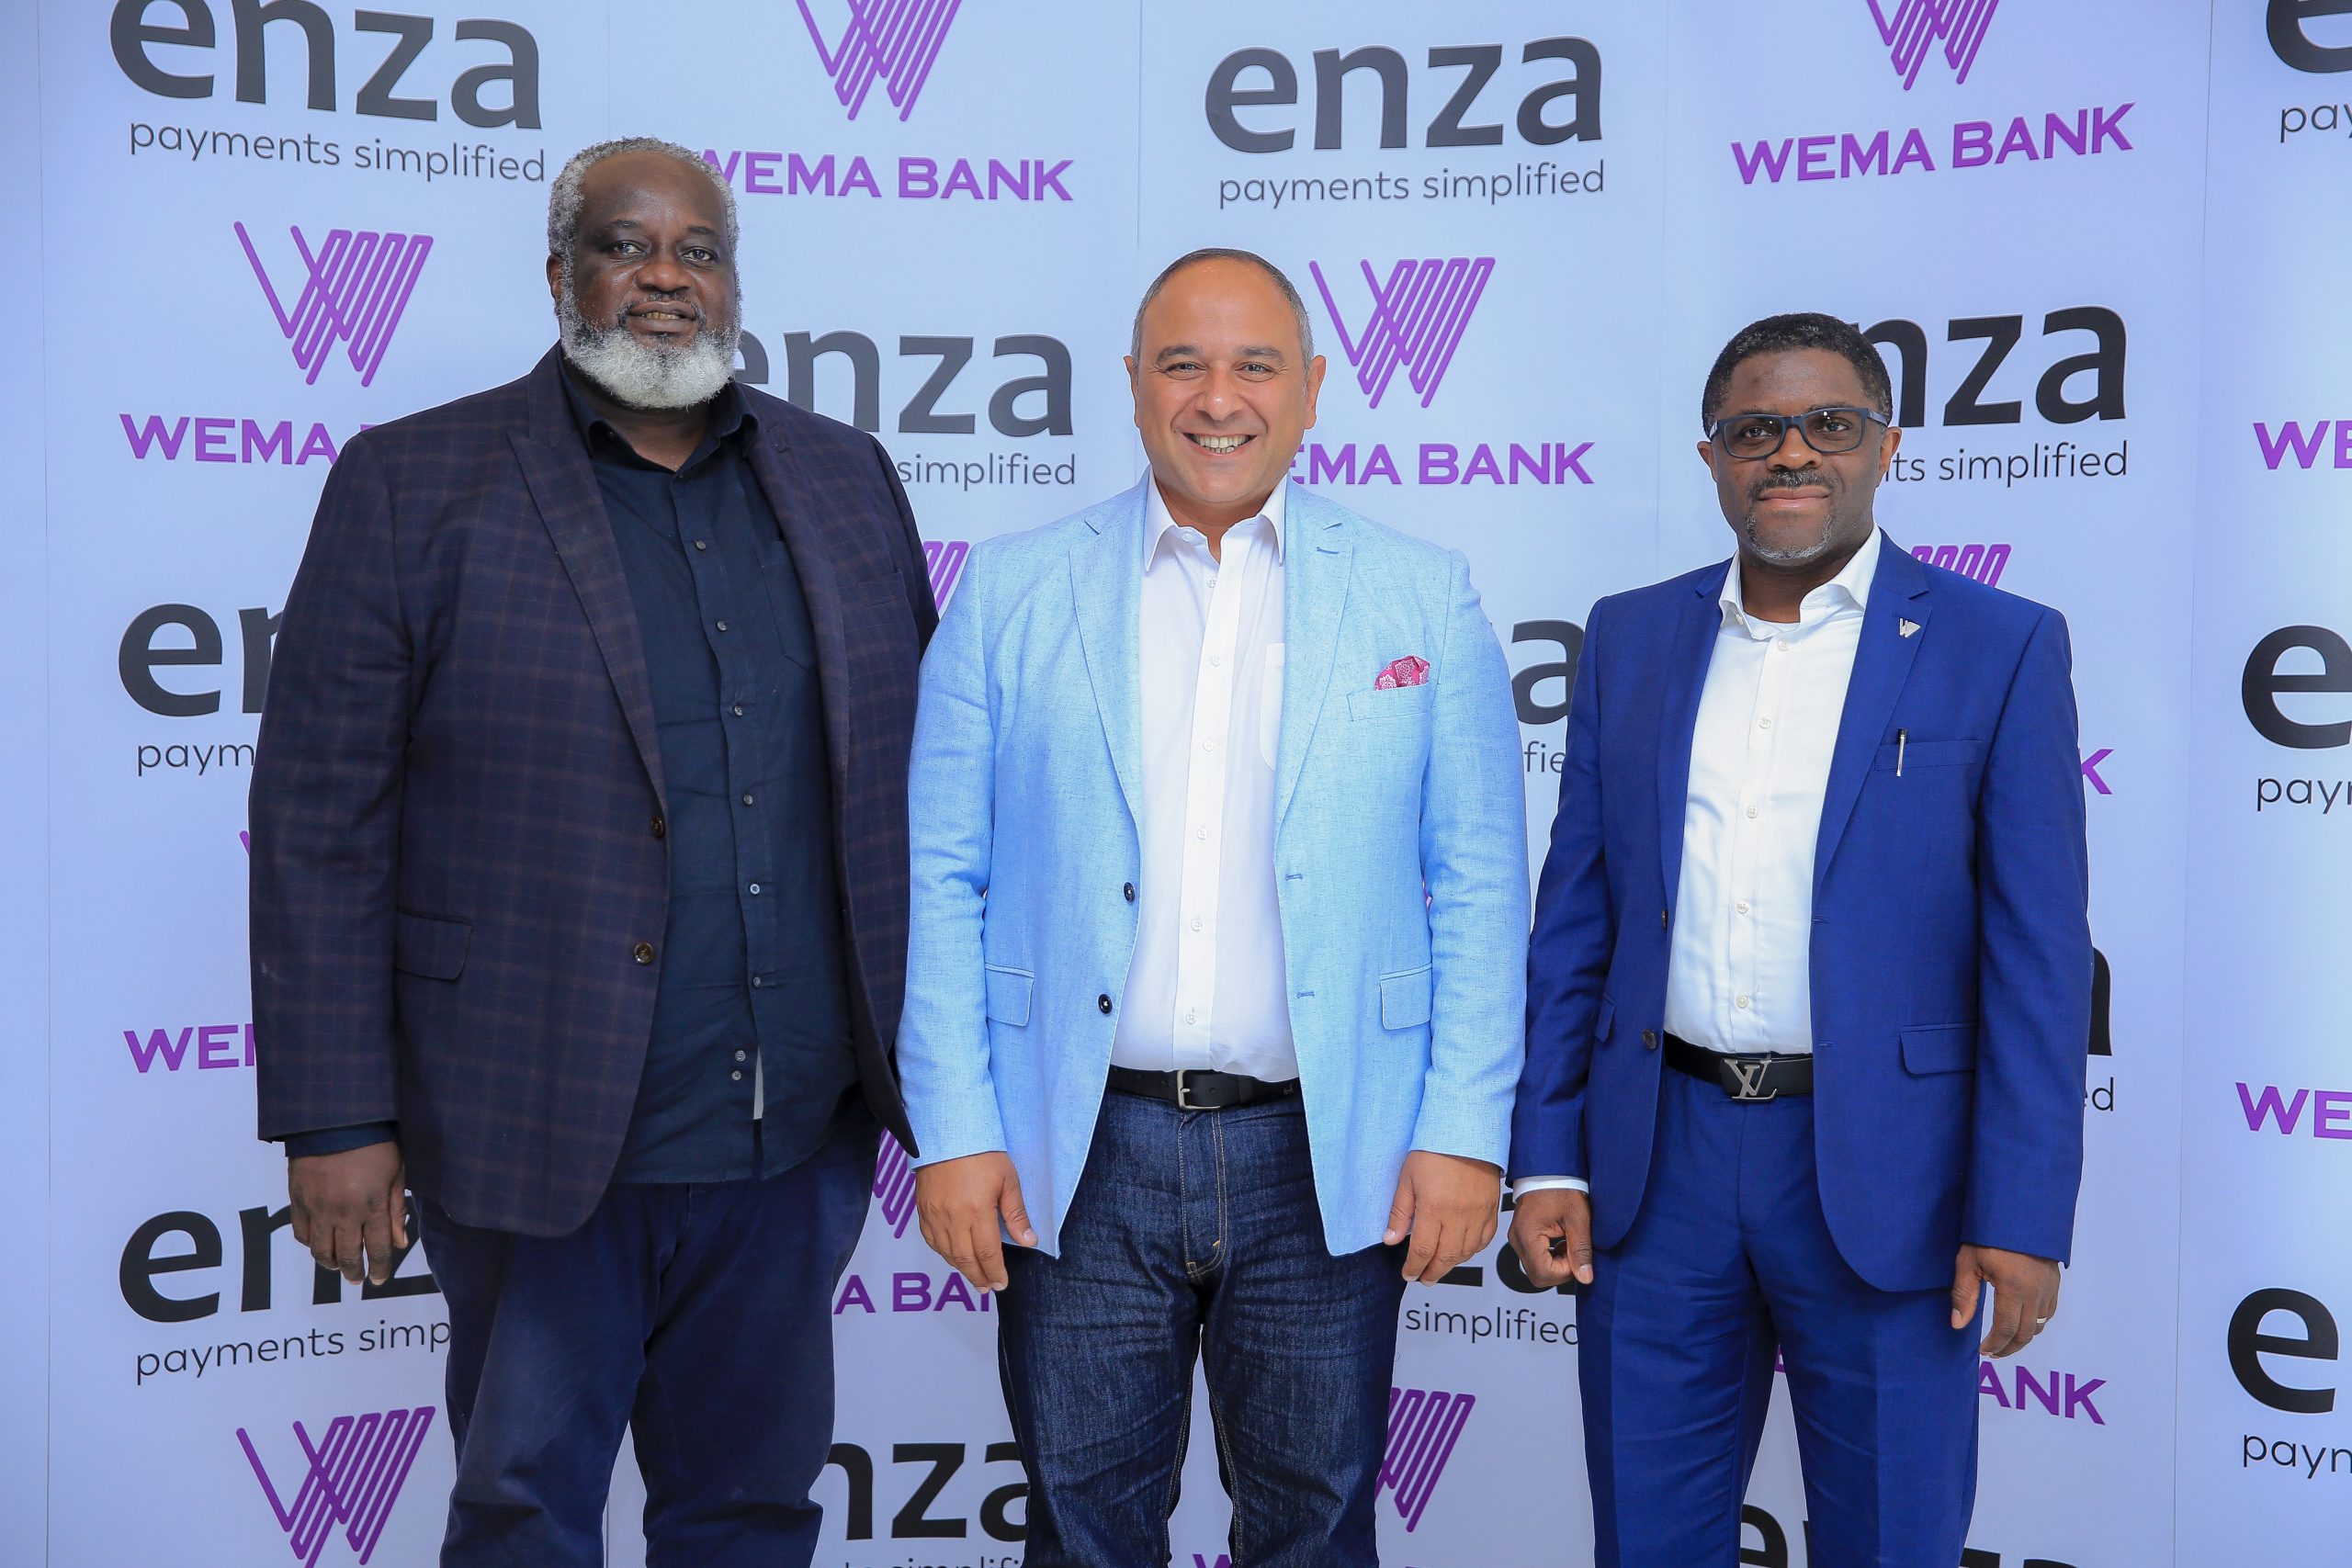 Wema Bank and enza group Join Forces to Boost Ecommerce Payment Acceptance